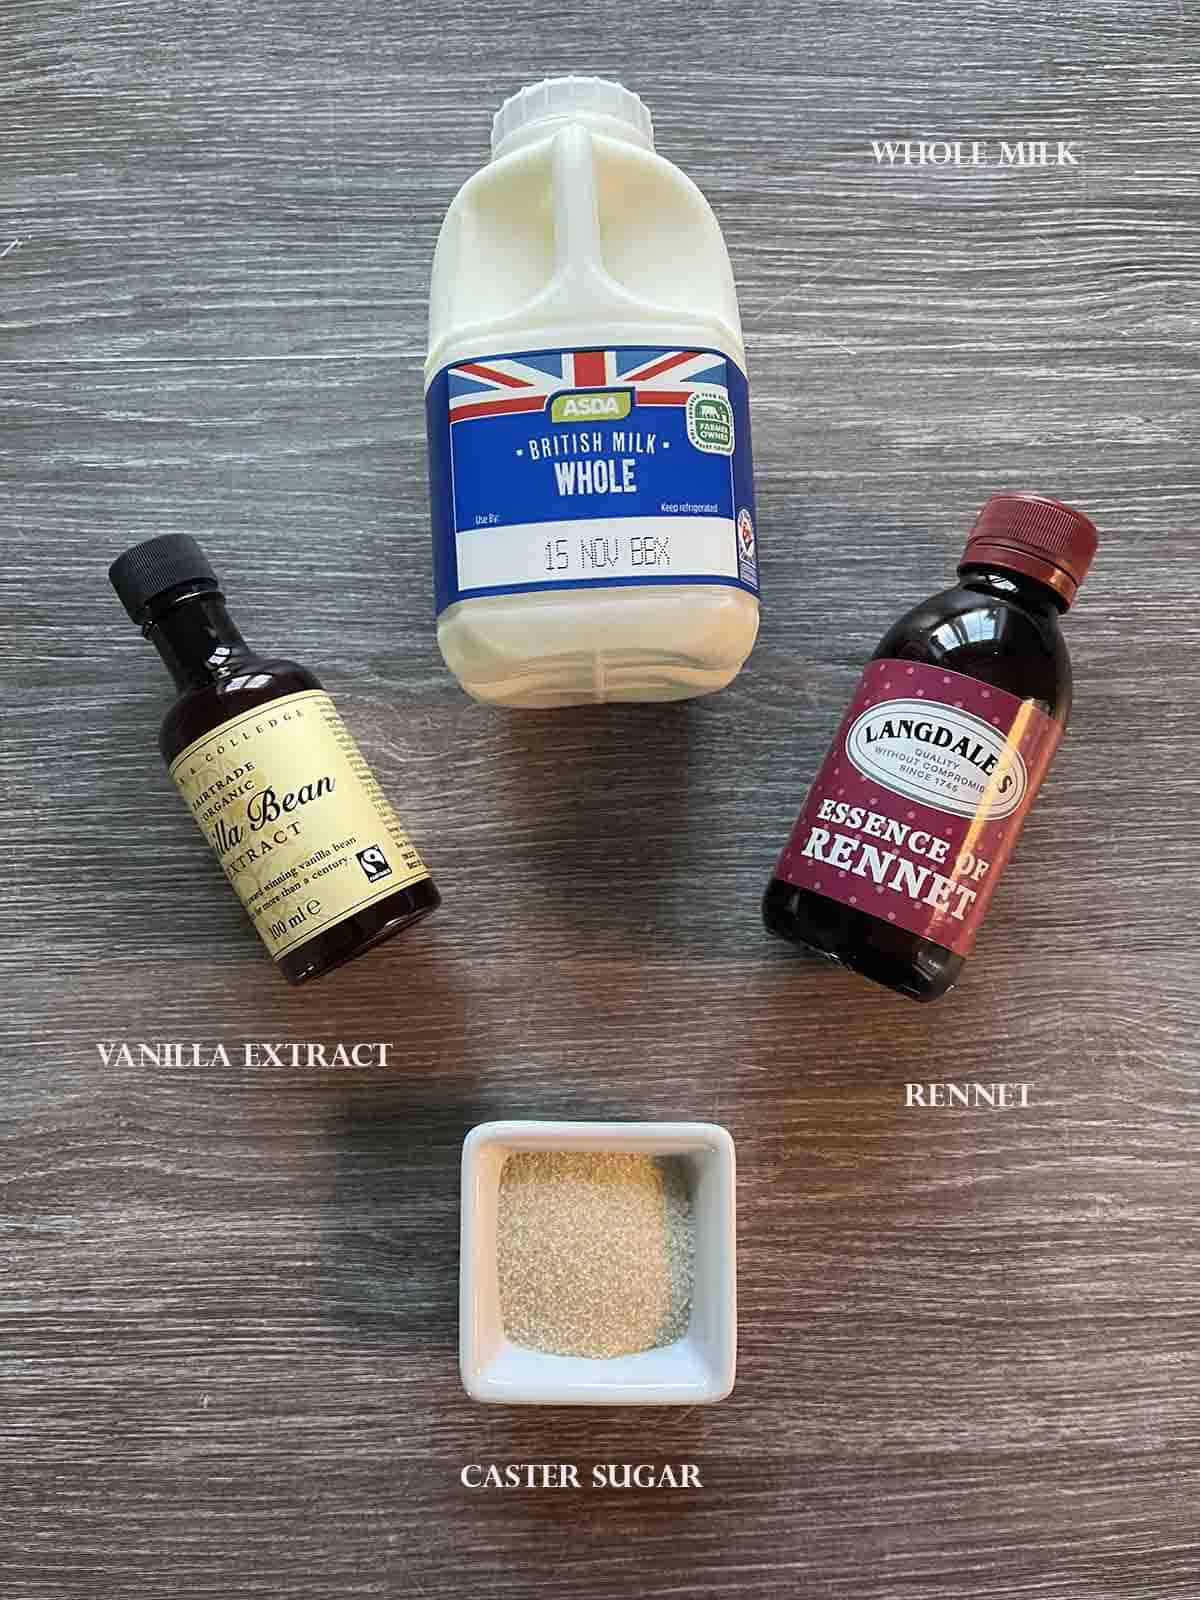 ingredients including milk and rennet.